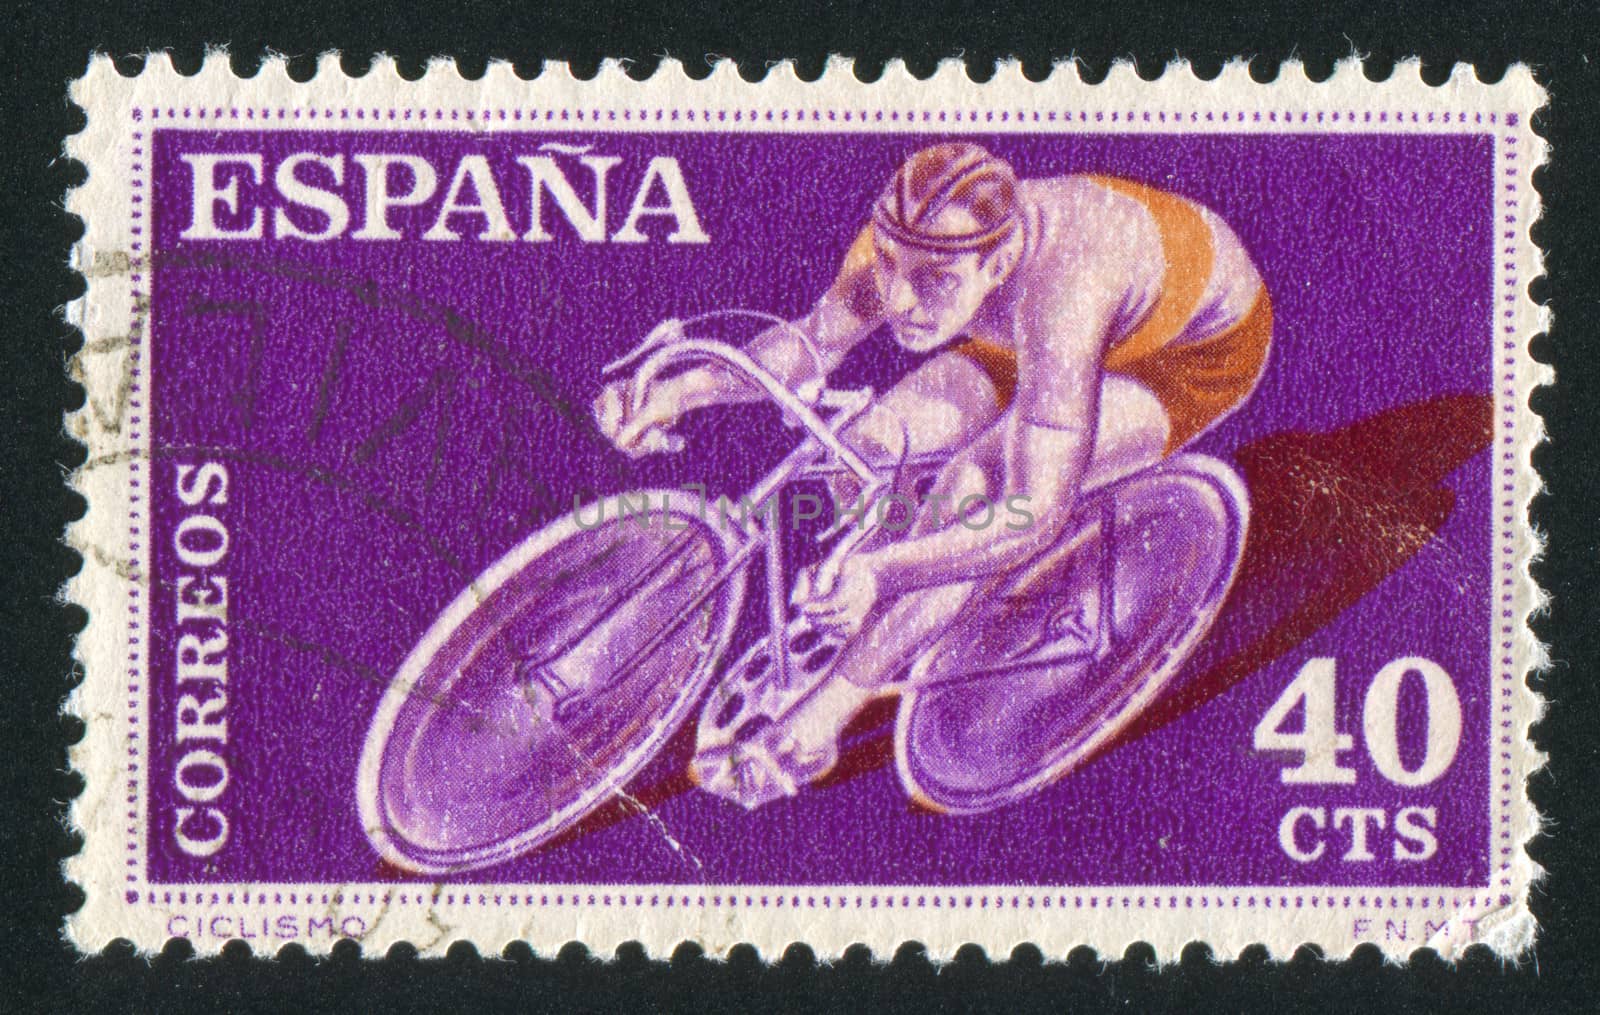 SPAIN - CIRCA 1960: stamp printed by Spain, shows Bicycling, circa 1960